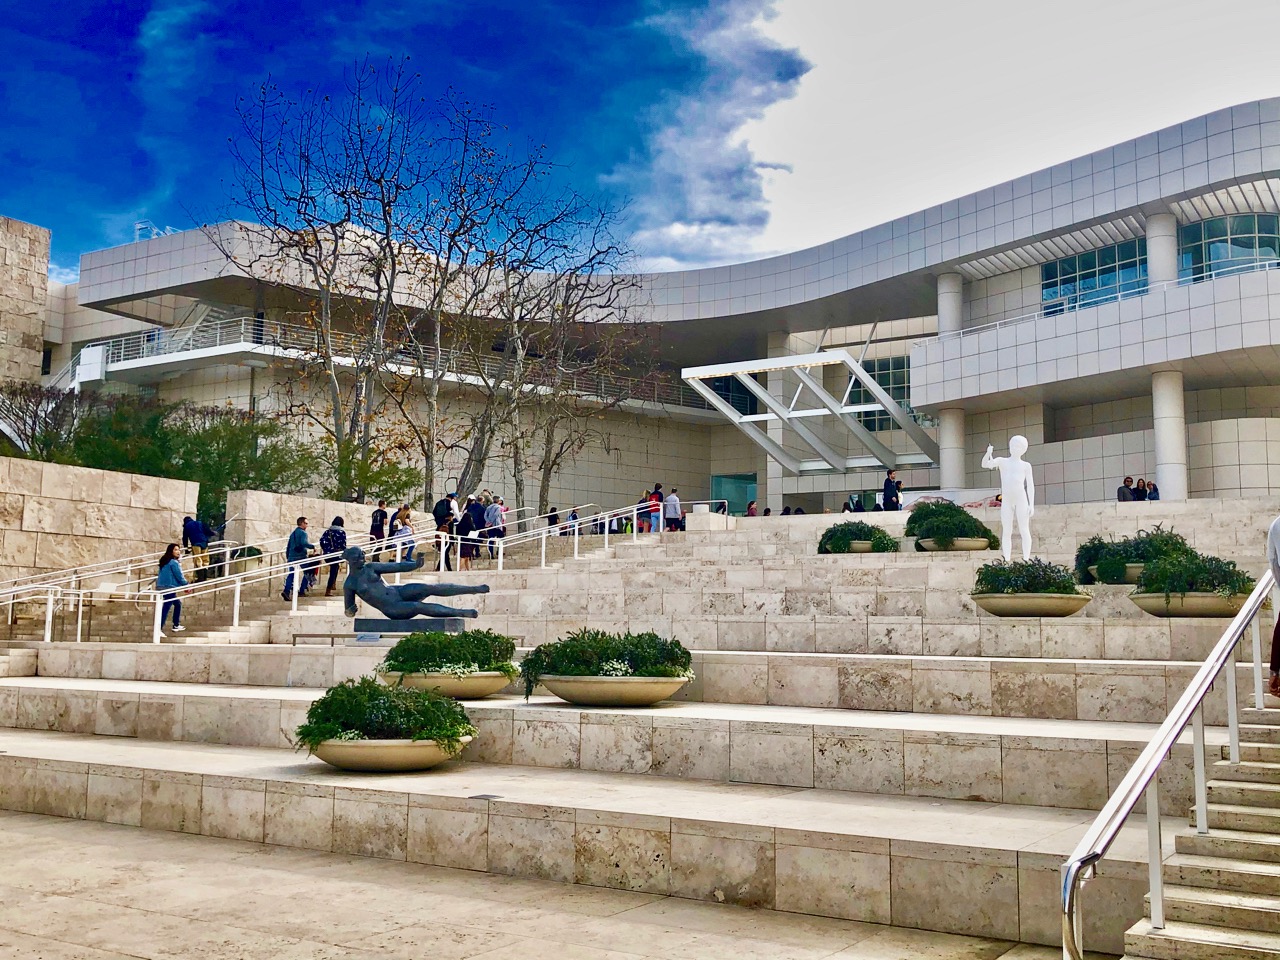 Getty Center in Los Angeles